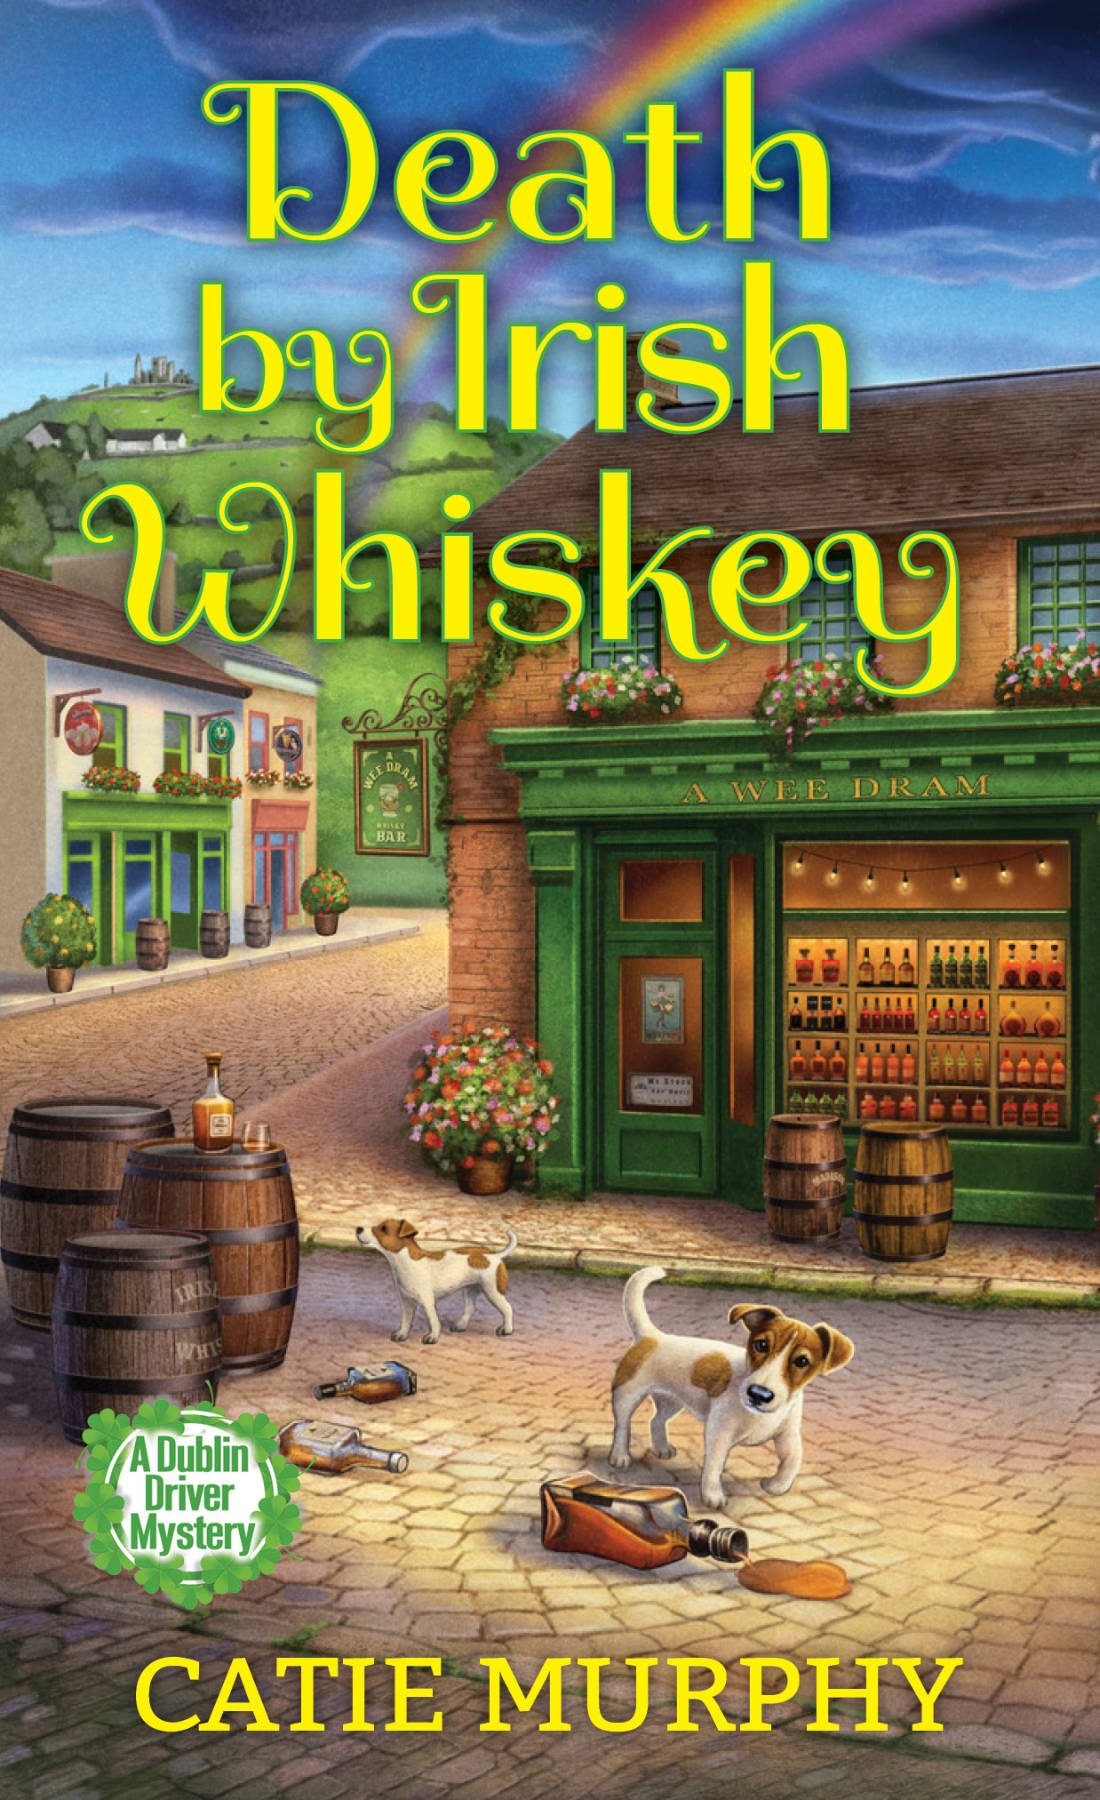 Dublin limo driver Megan Malone finds her relationship on the rocks when a double murder at the whiskey festival draws her in – despite promising her girlfriend she’d quit sleuthing for good…